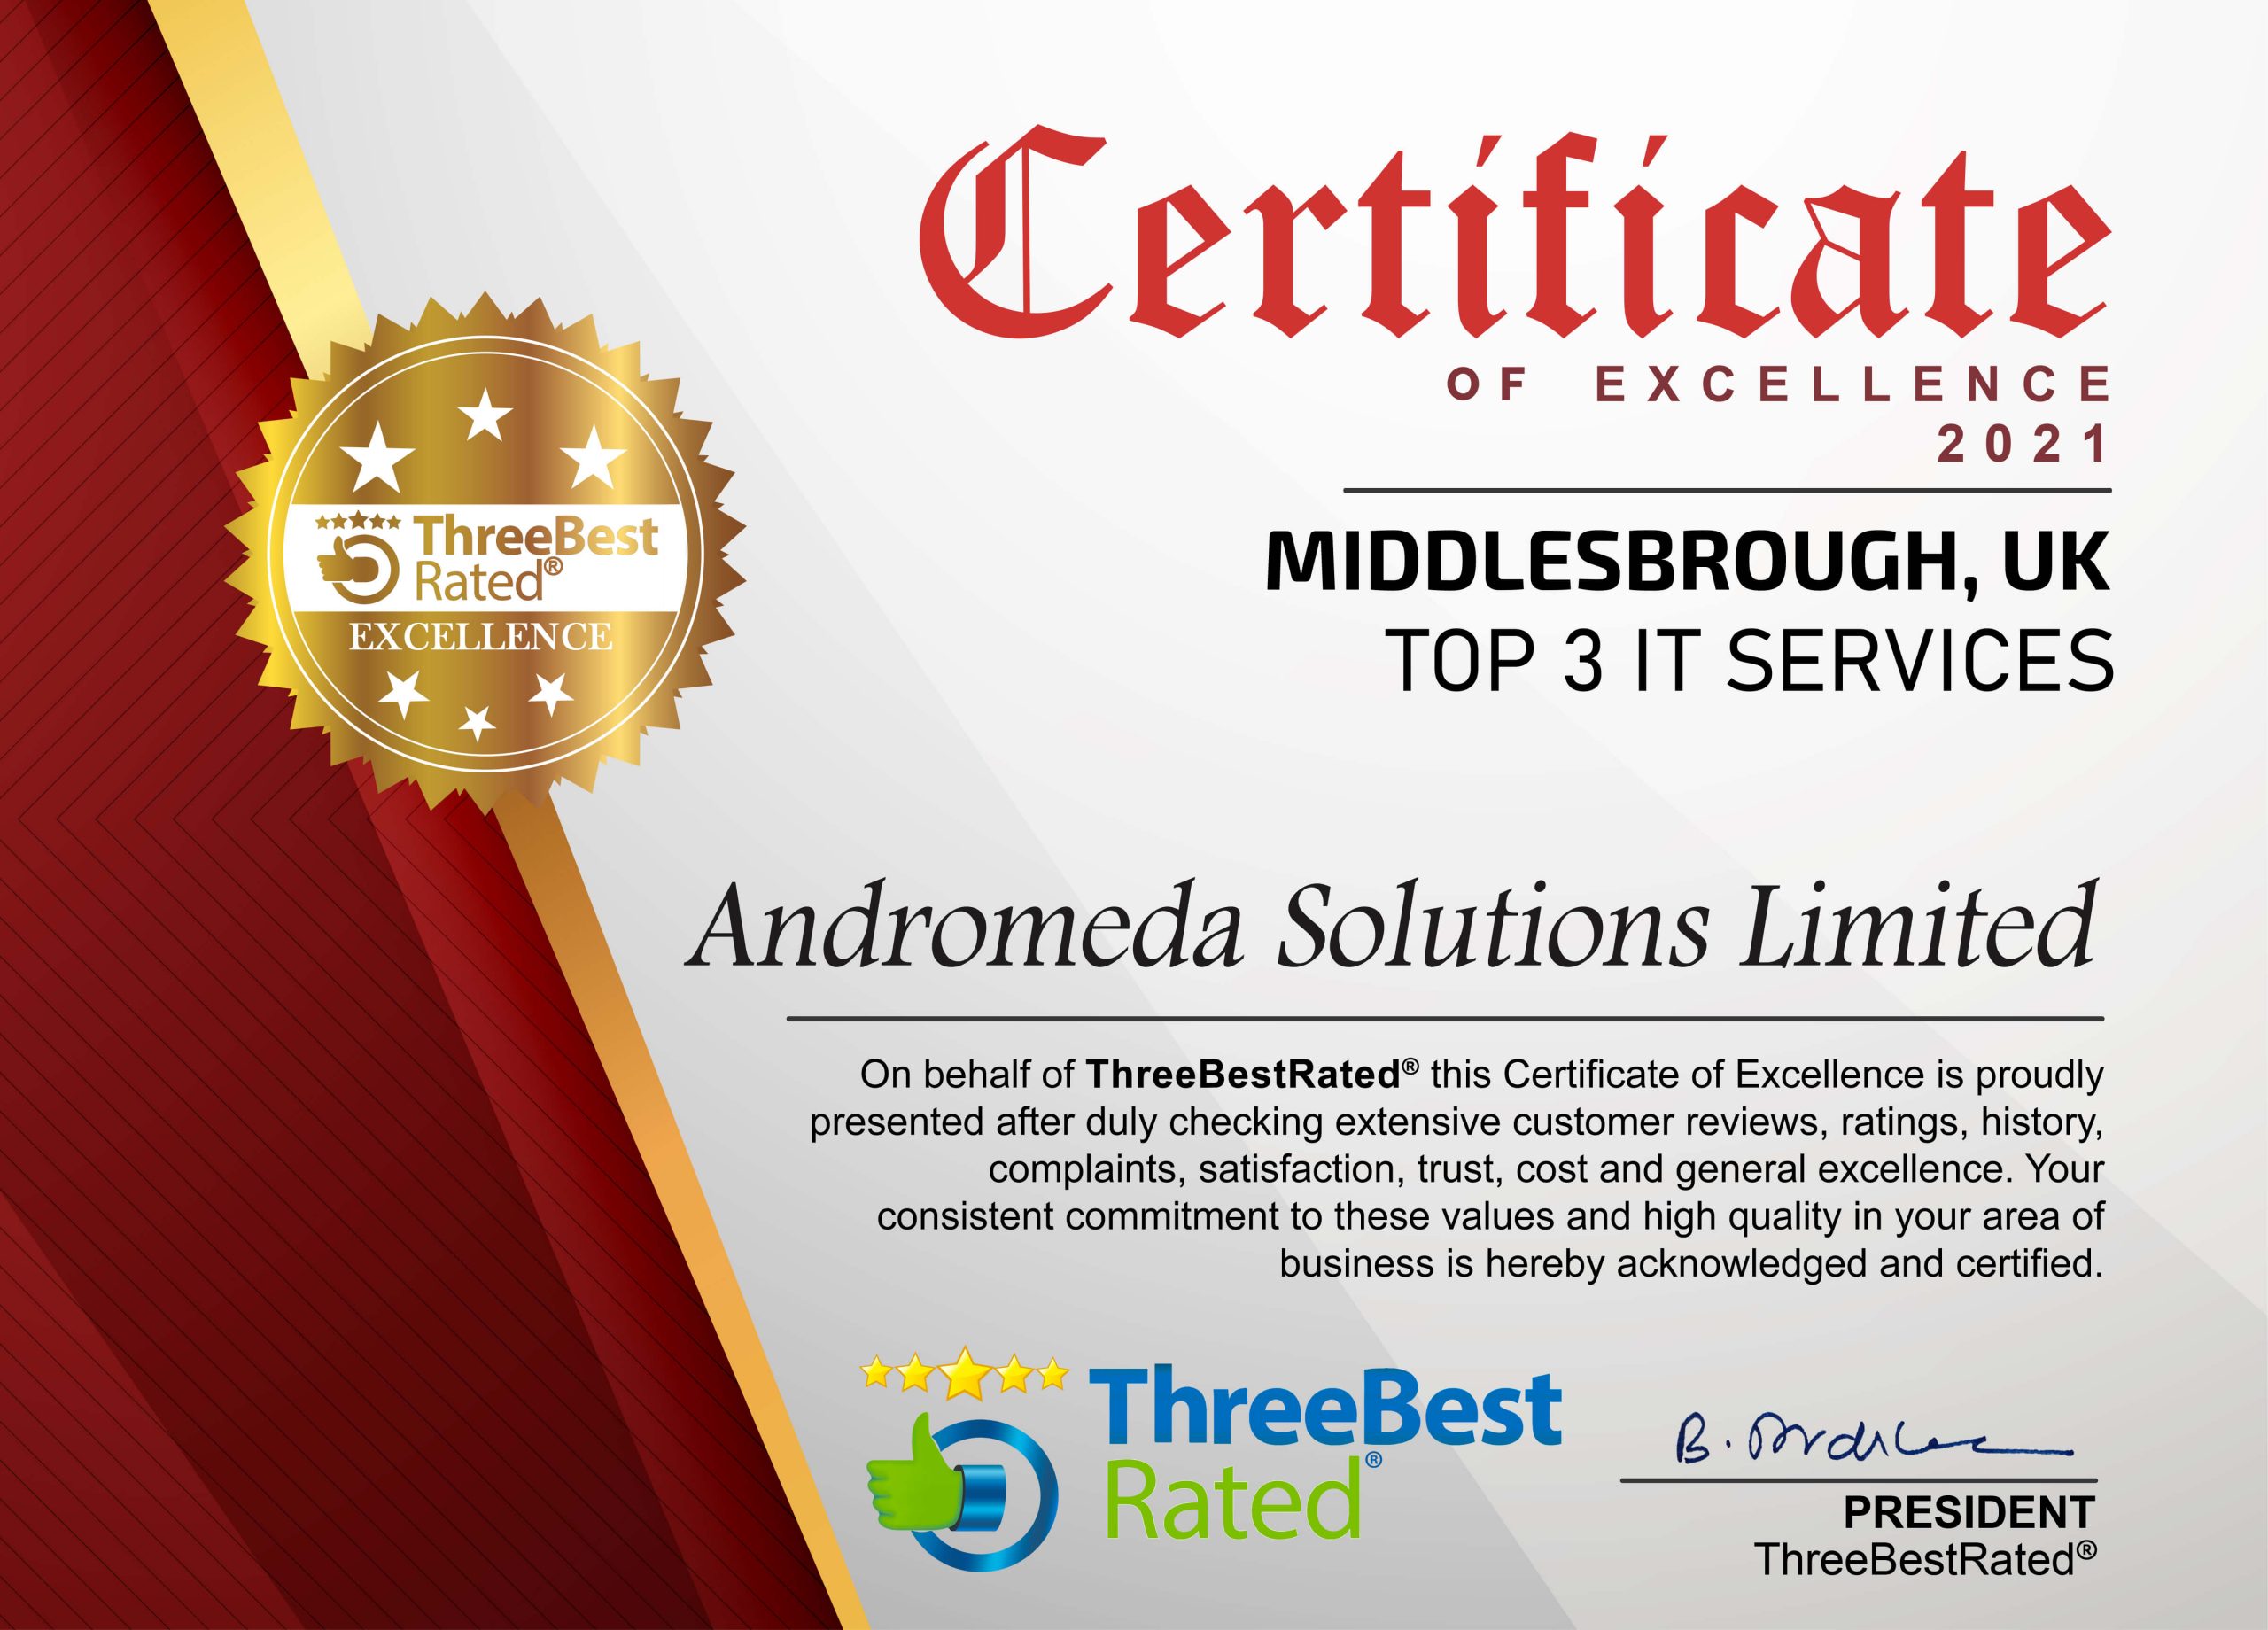 Andromeda Solutions: Award Winning IT Services in Middlesbrough